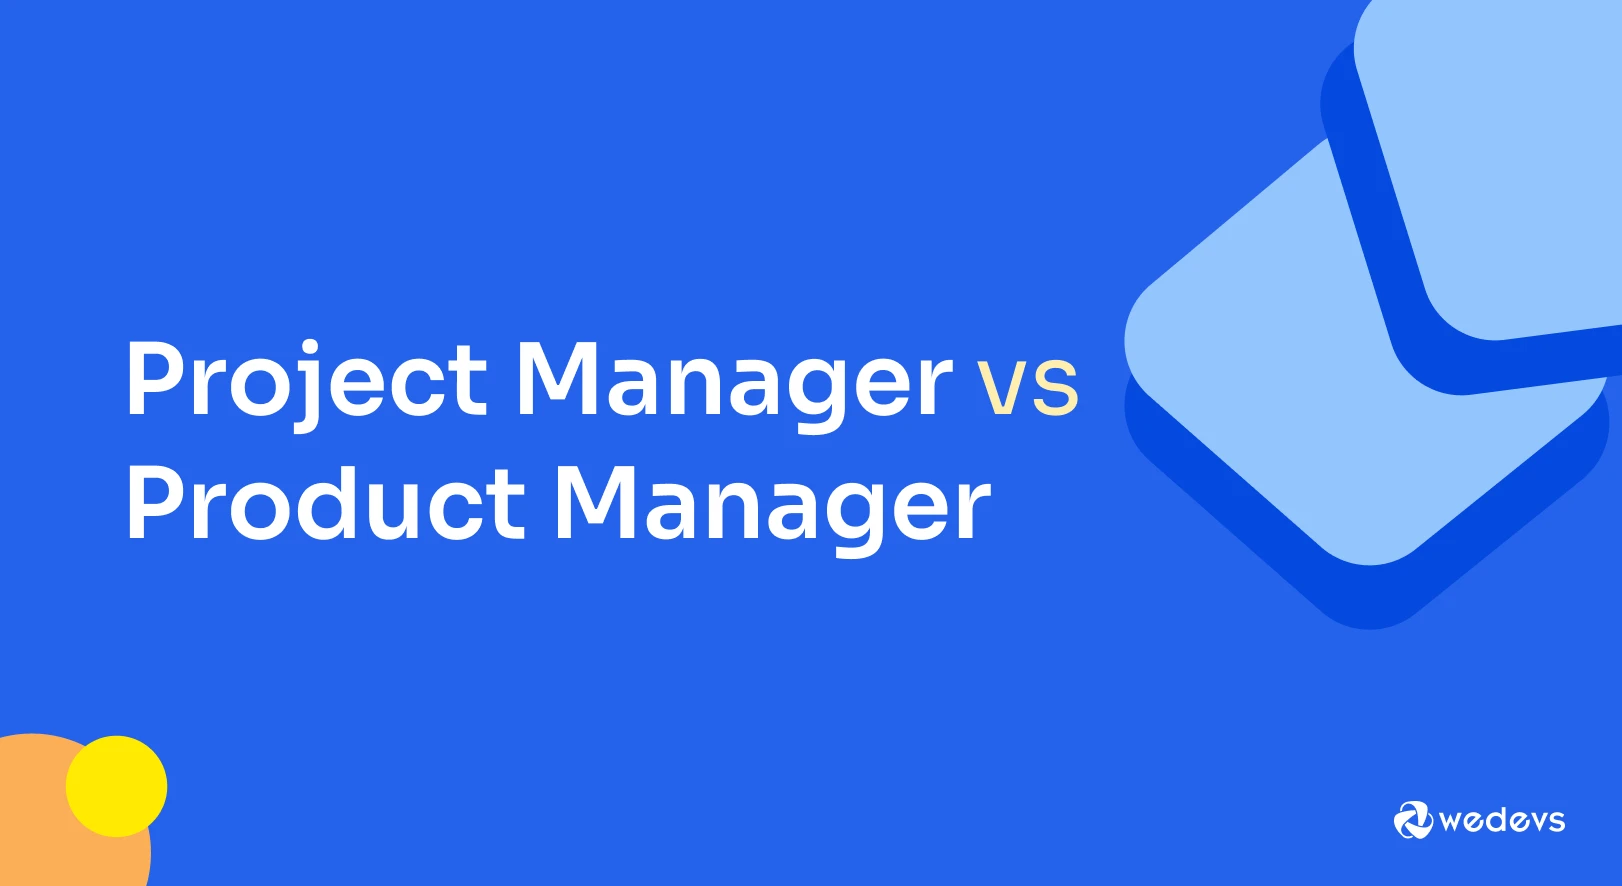 Project Manager vs Product Manager &#8211; What are the Key Differences Between the Roles